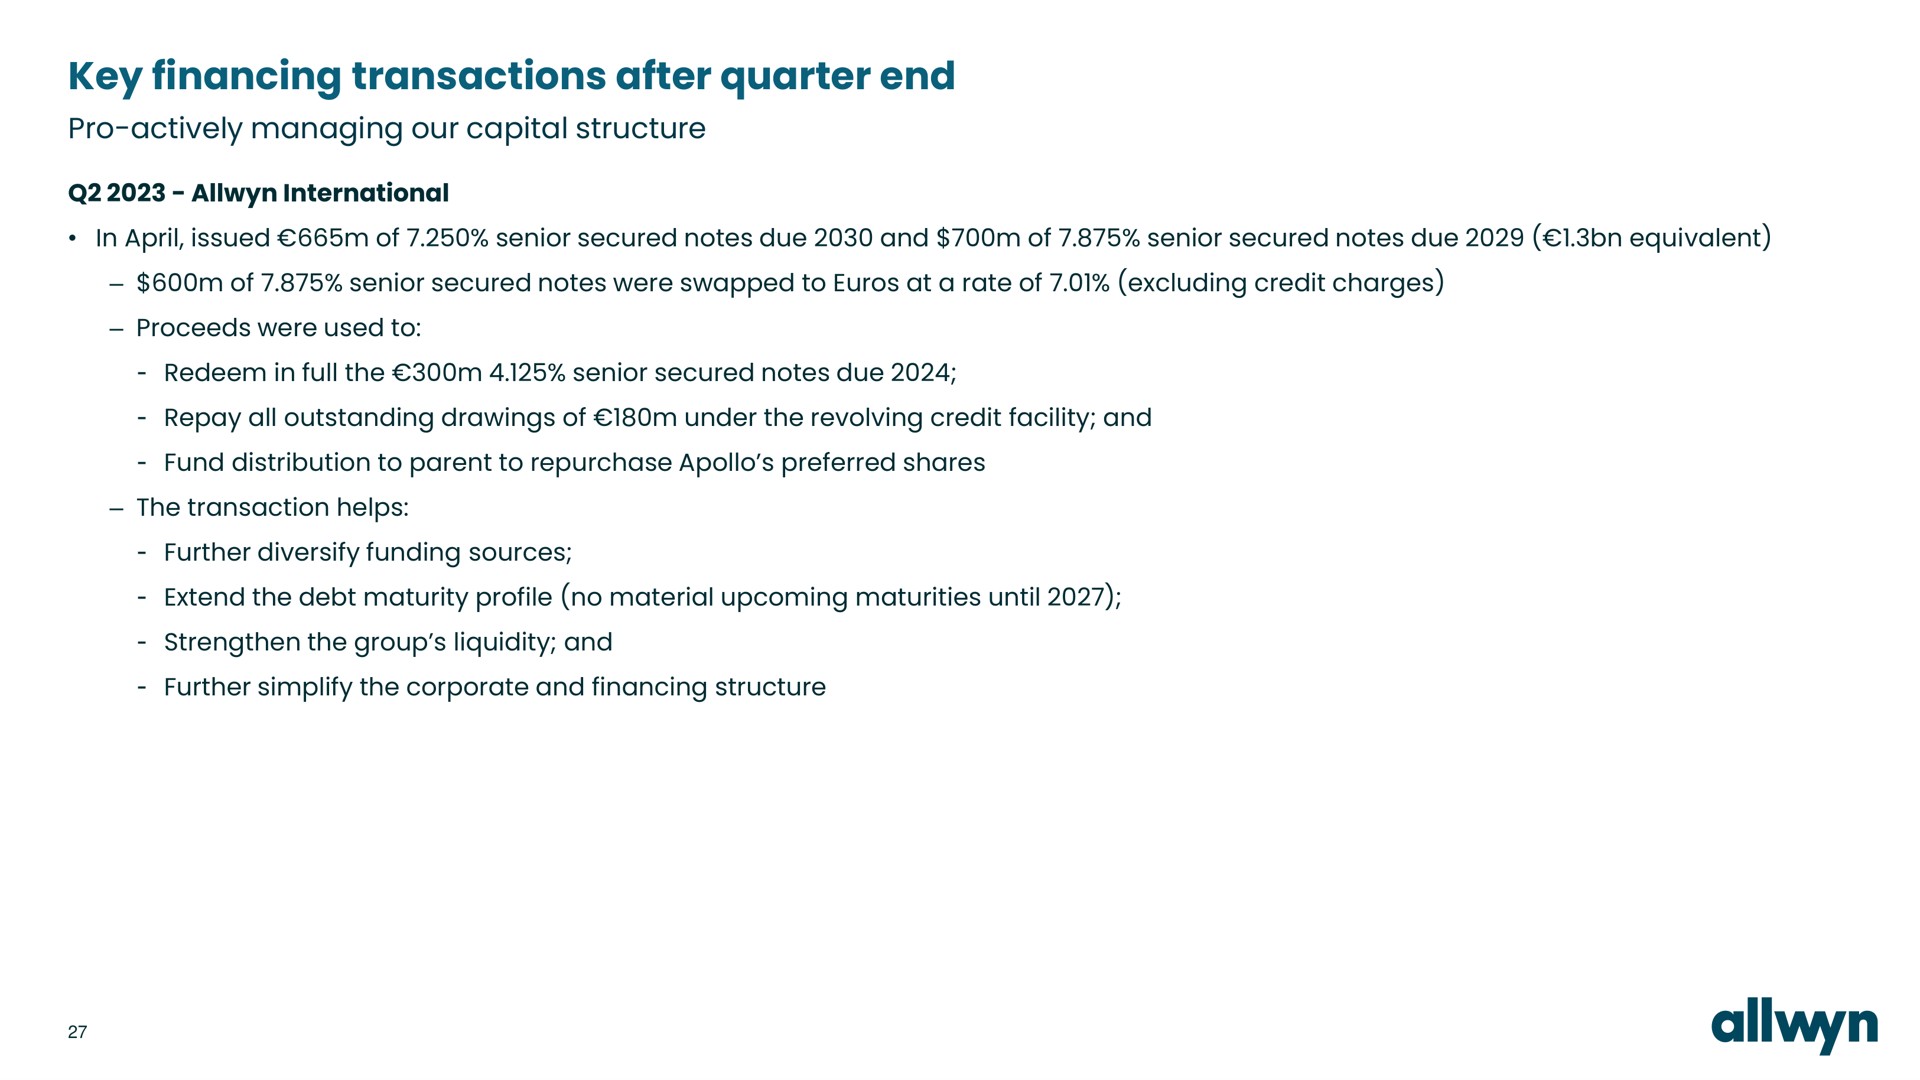 key financing transactions after quarter end pro actively managing our capital structure | Allwyn